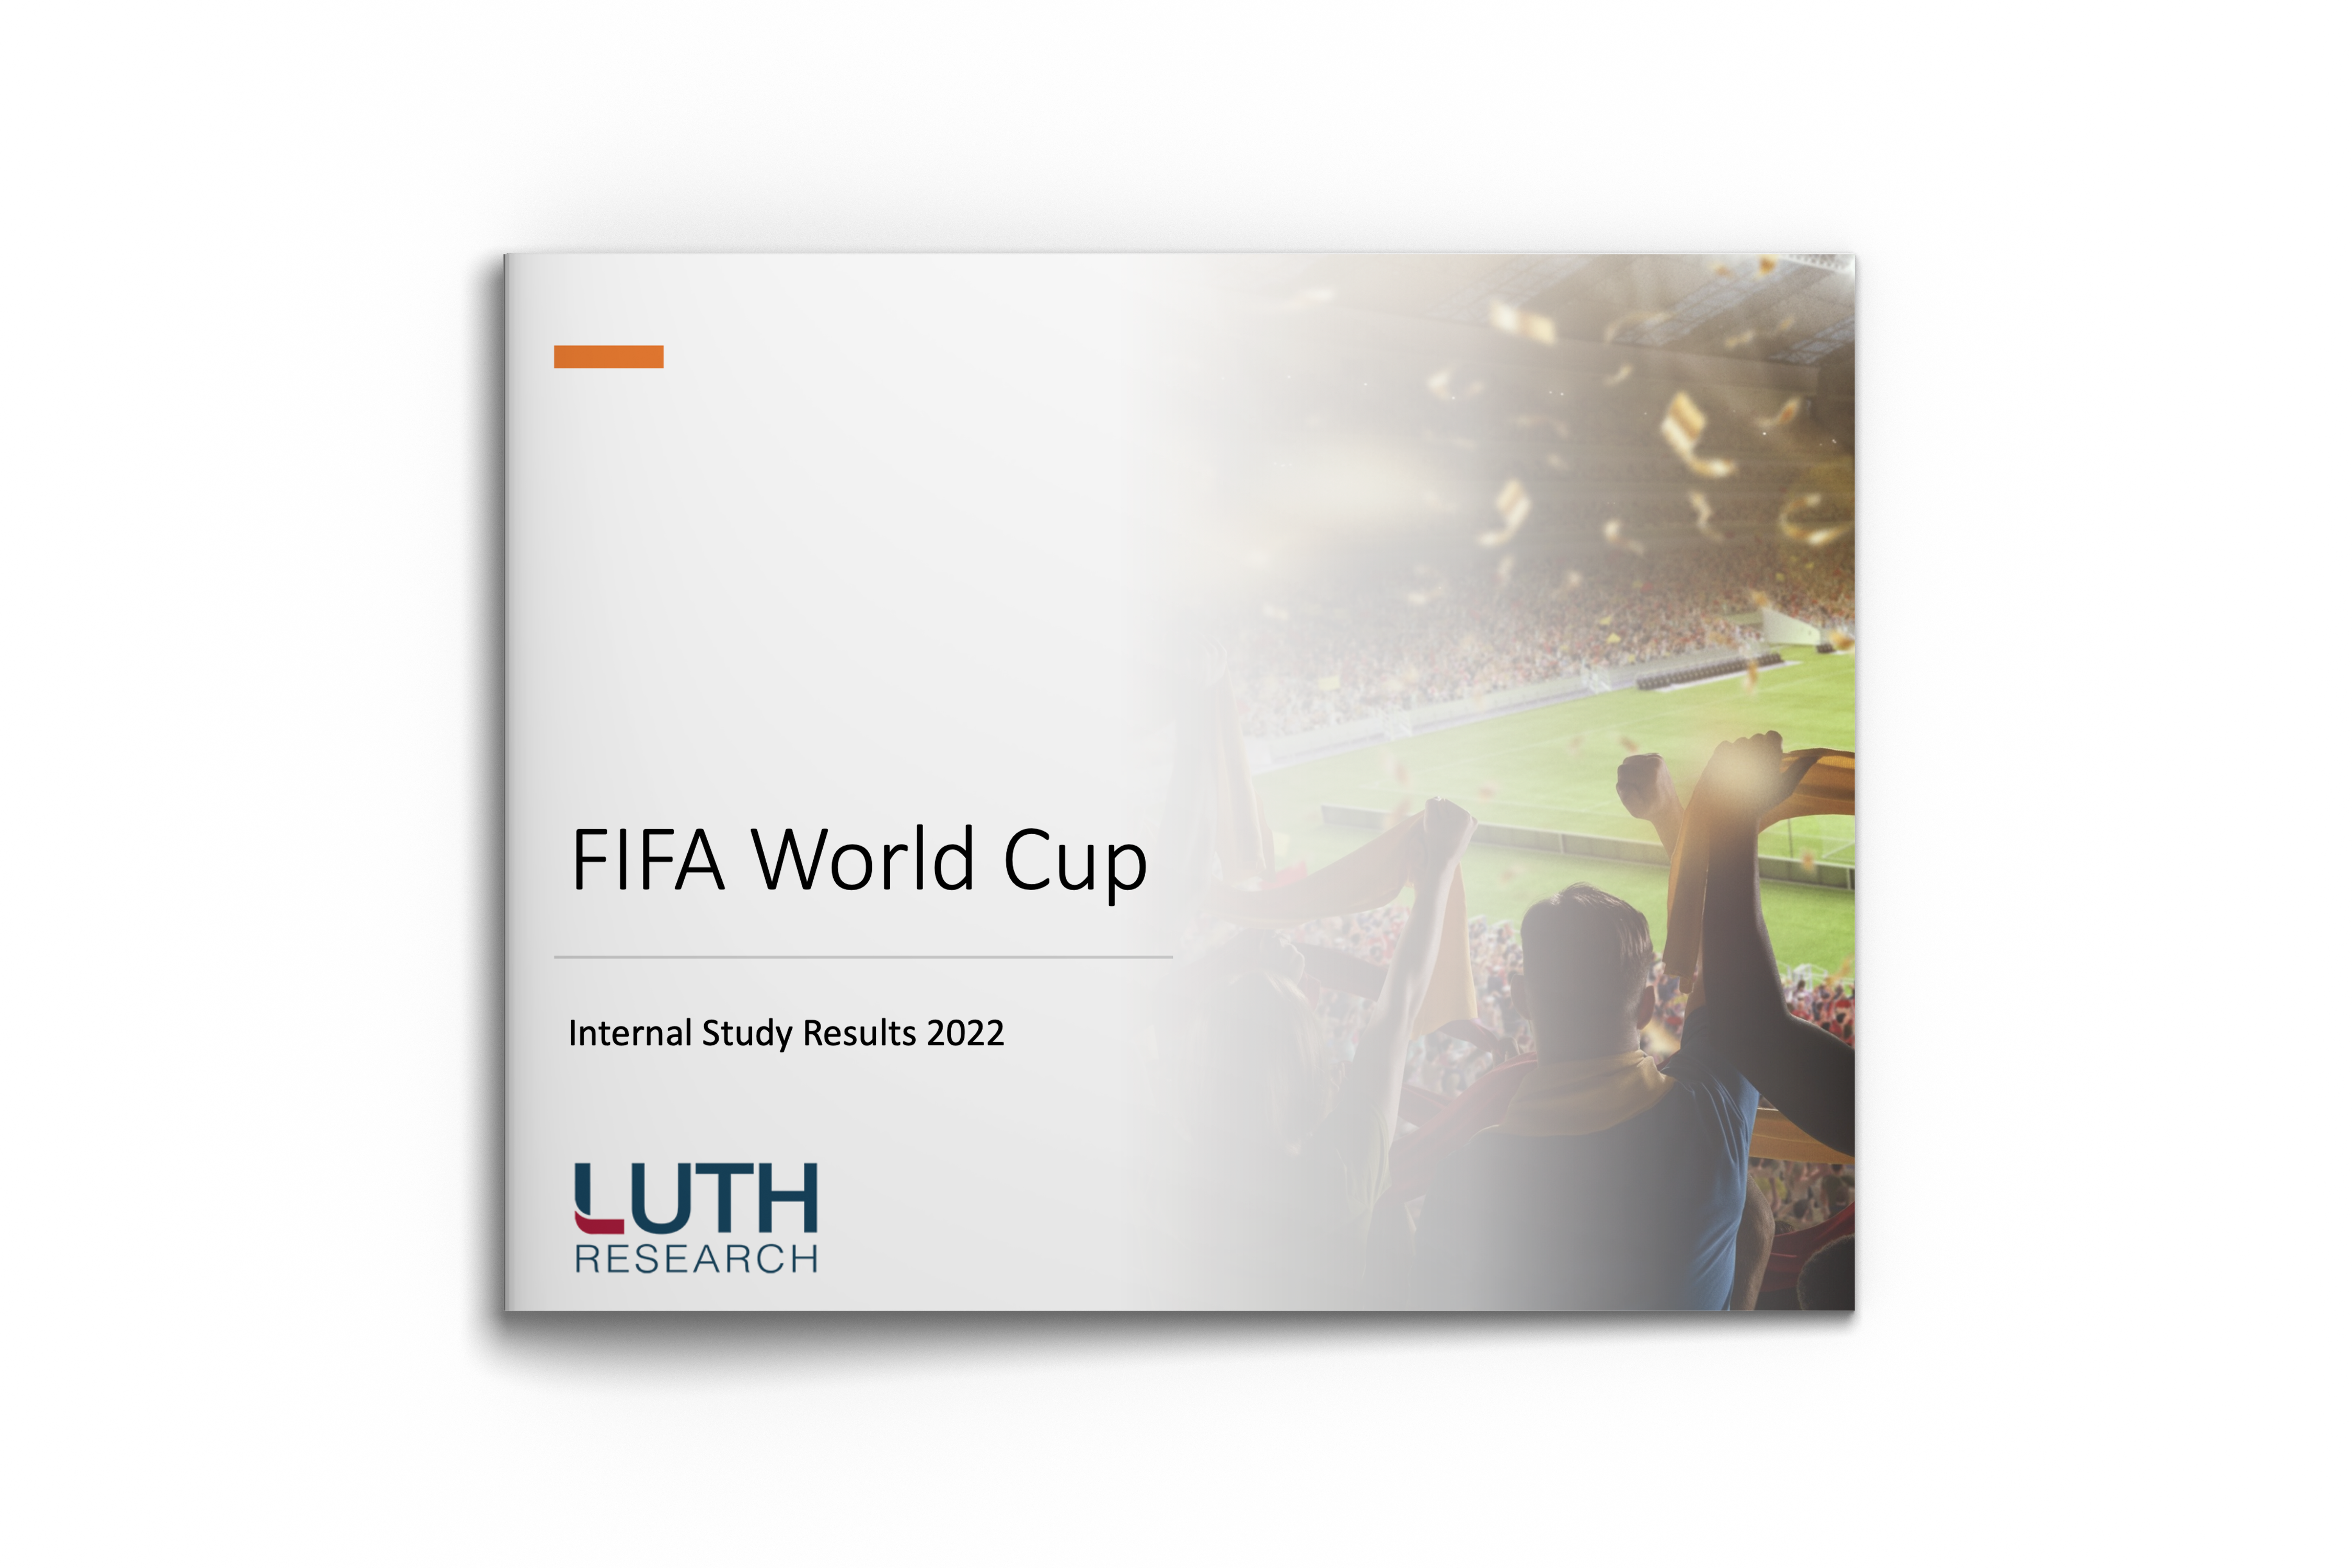 FIFA World Cup Viewership Report 2022